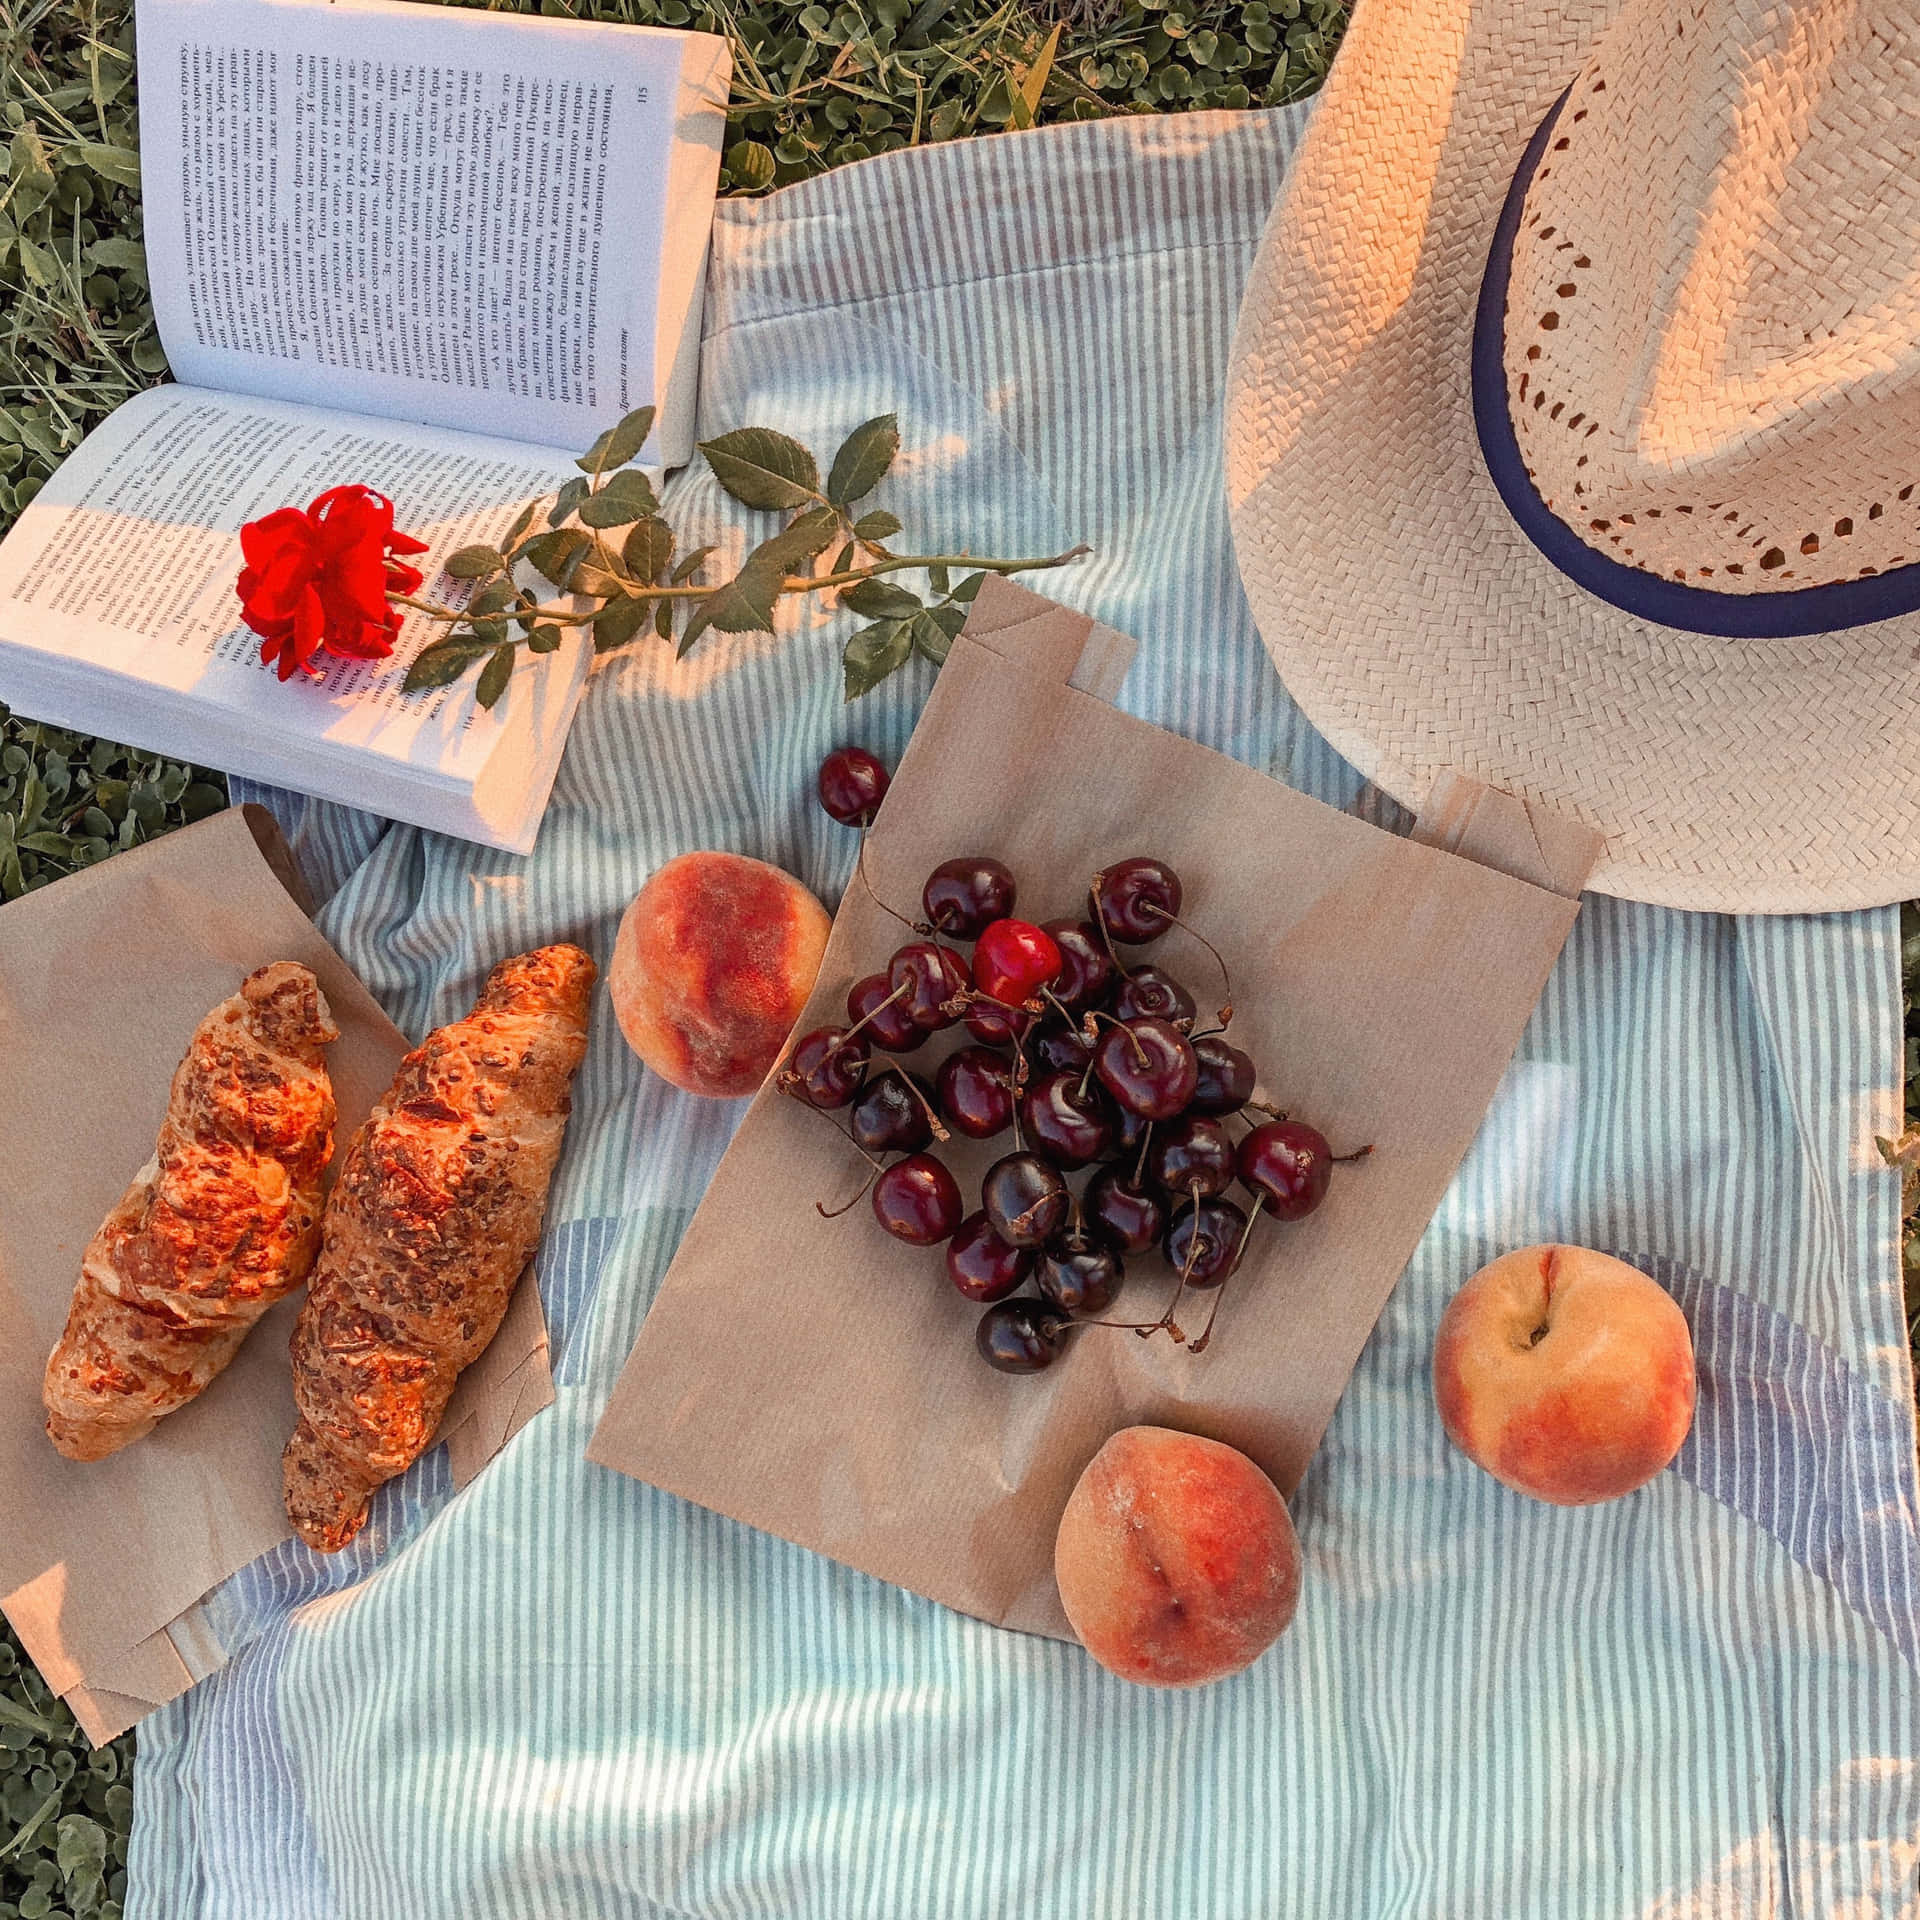 A Picnic Blanket With A Book, Croissants, And Fruit